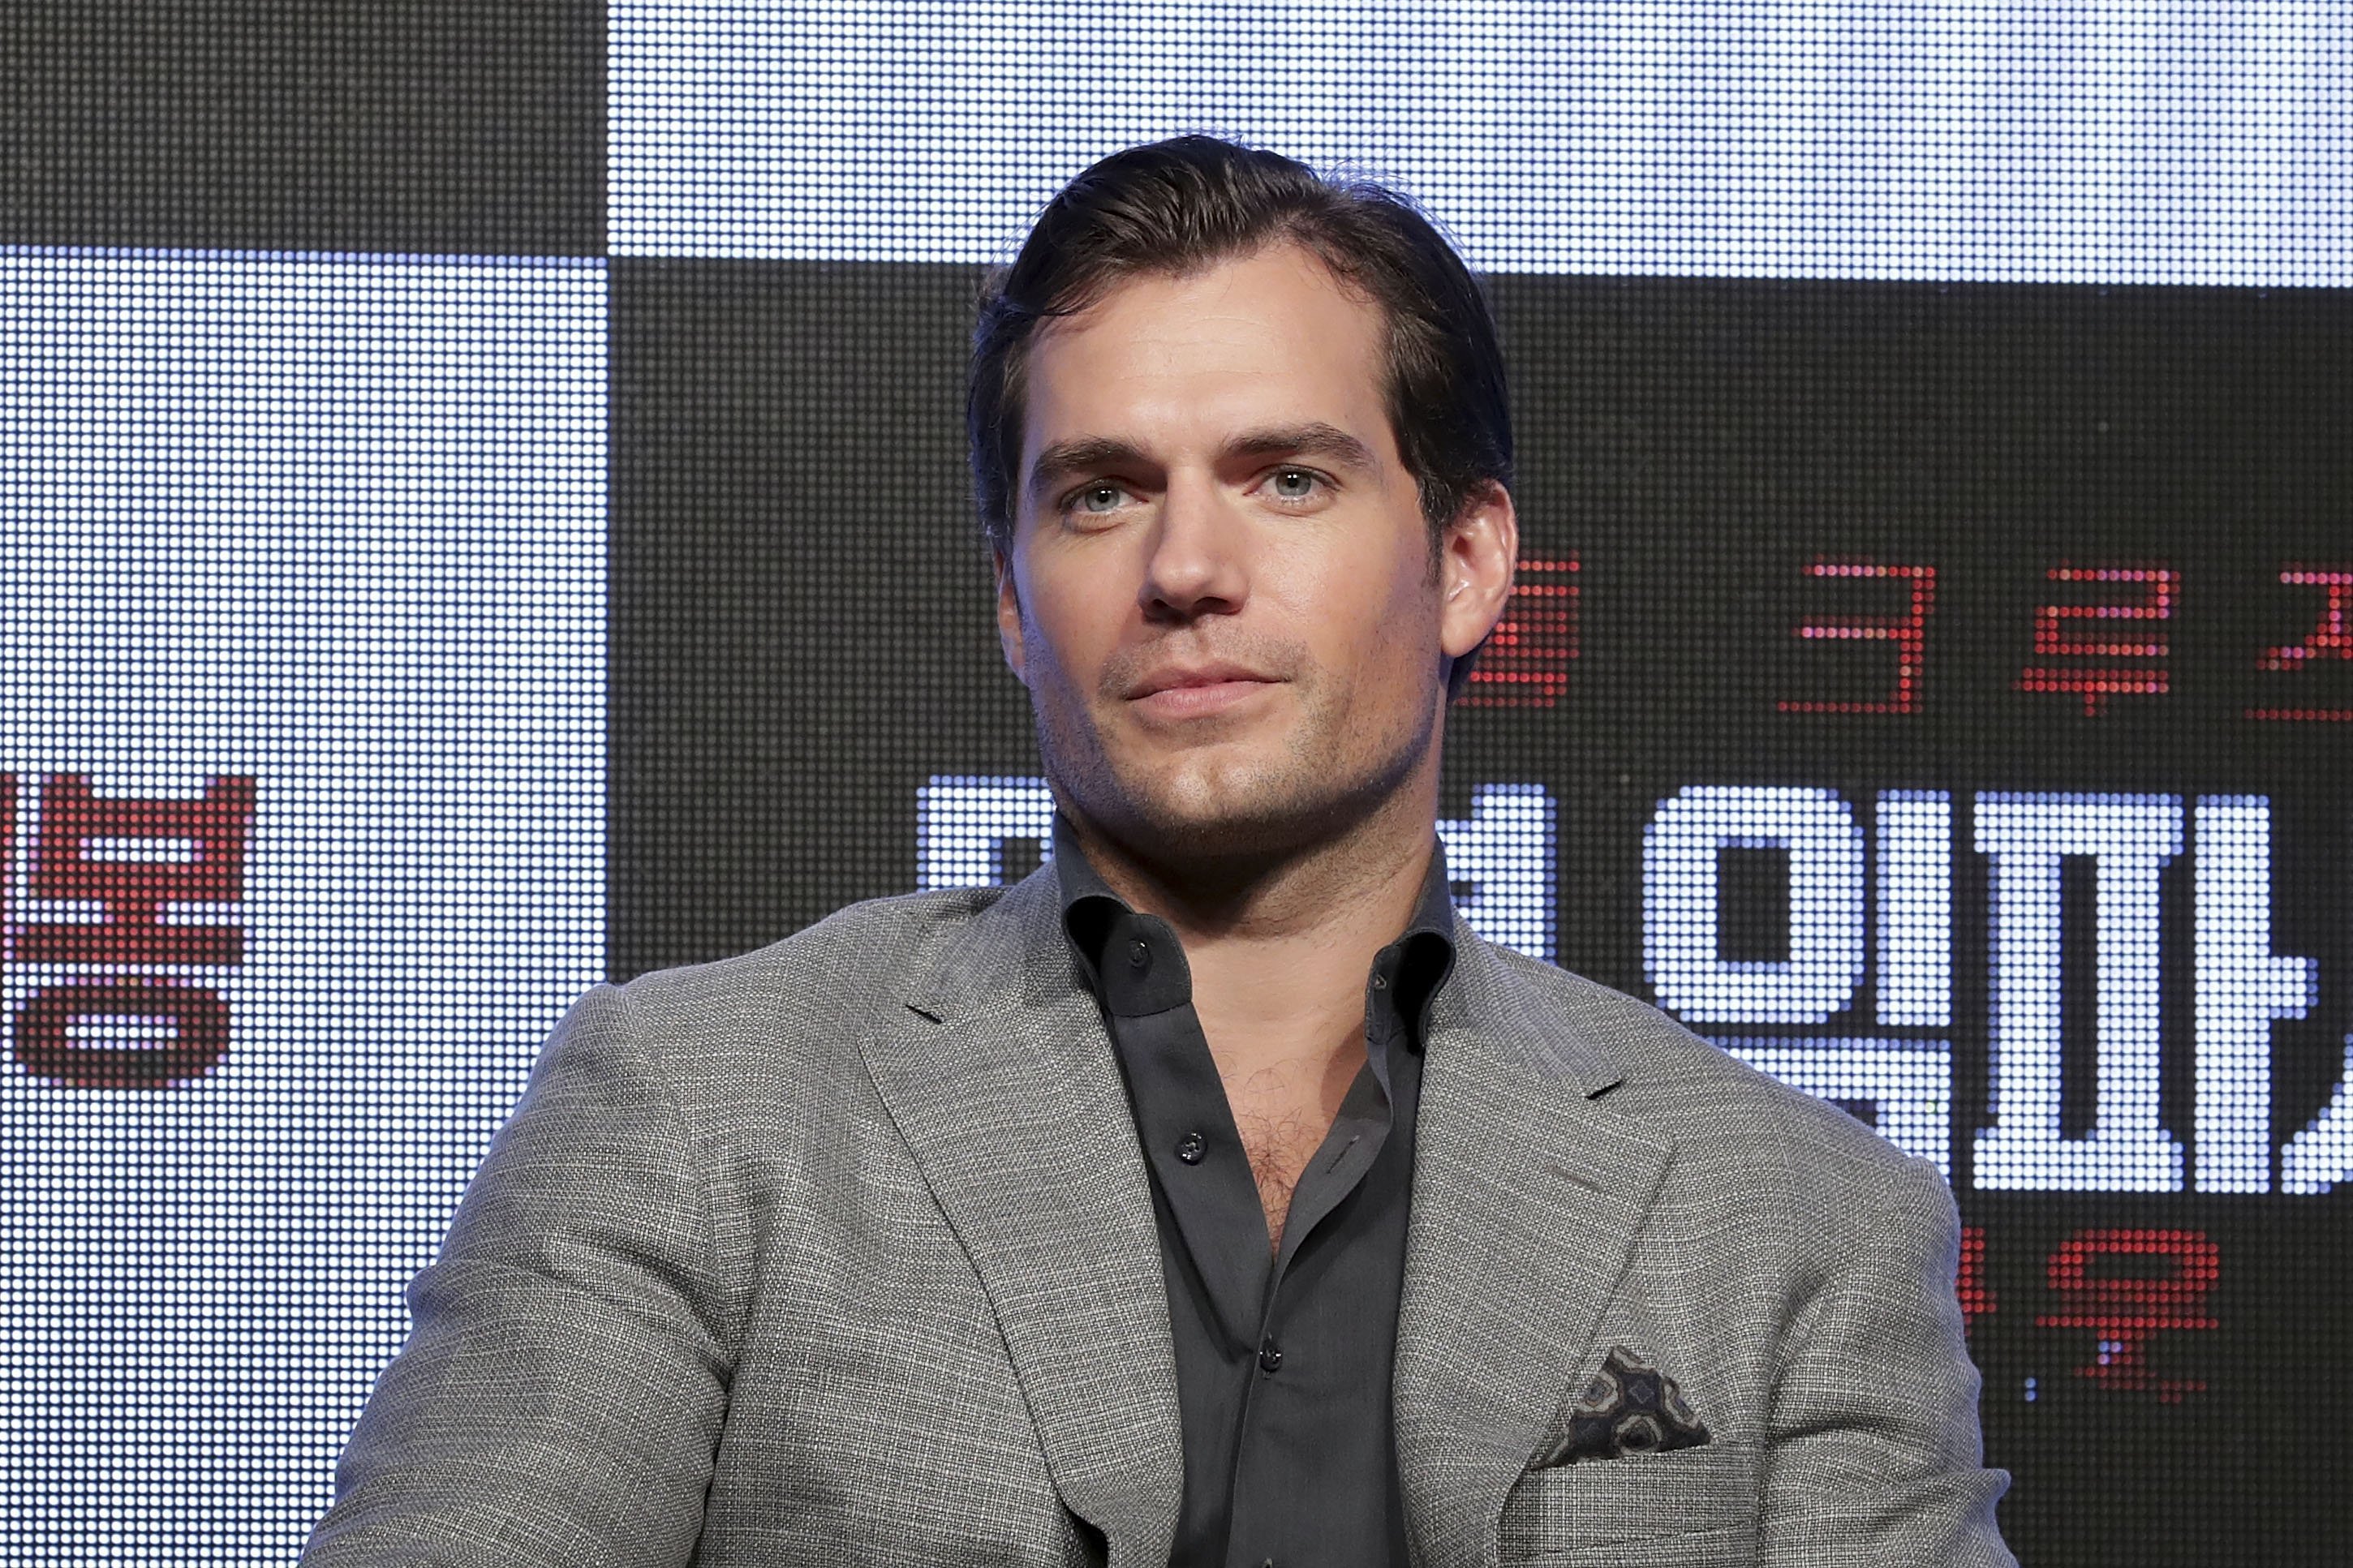 Henry Cavill attends the 'Mission: Impossible - Fallout' Korea Press Conference and Photo Call at Lotte Hotel Seoul on July 16, 2018 | Photo: GettyImages